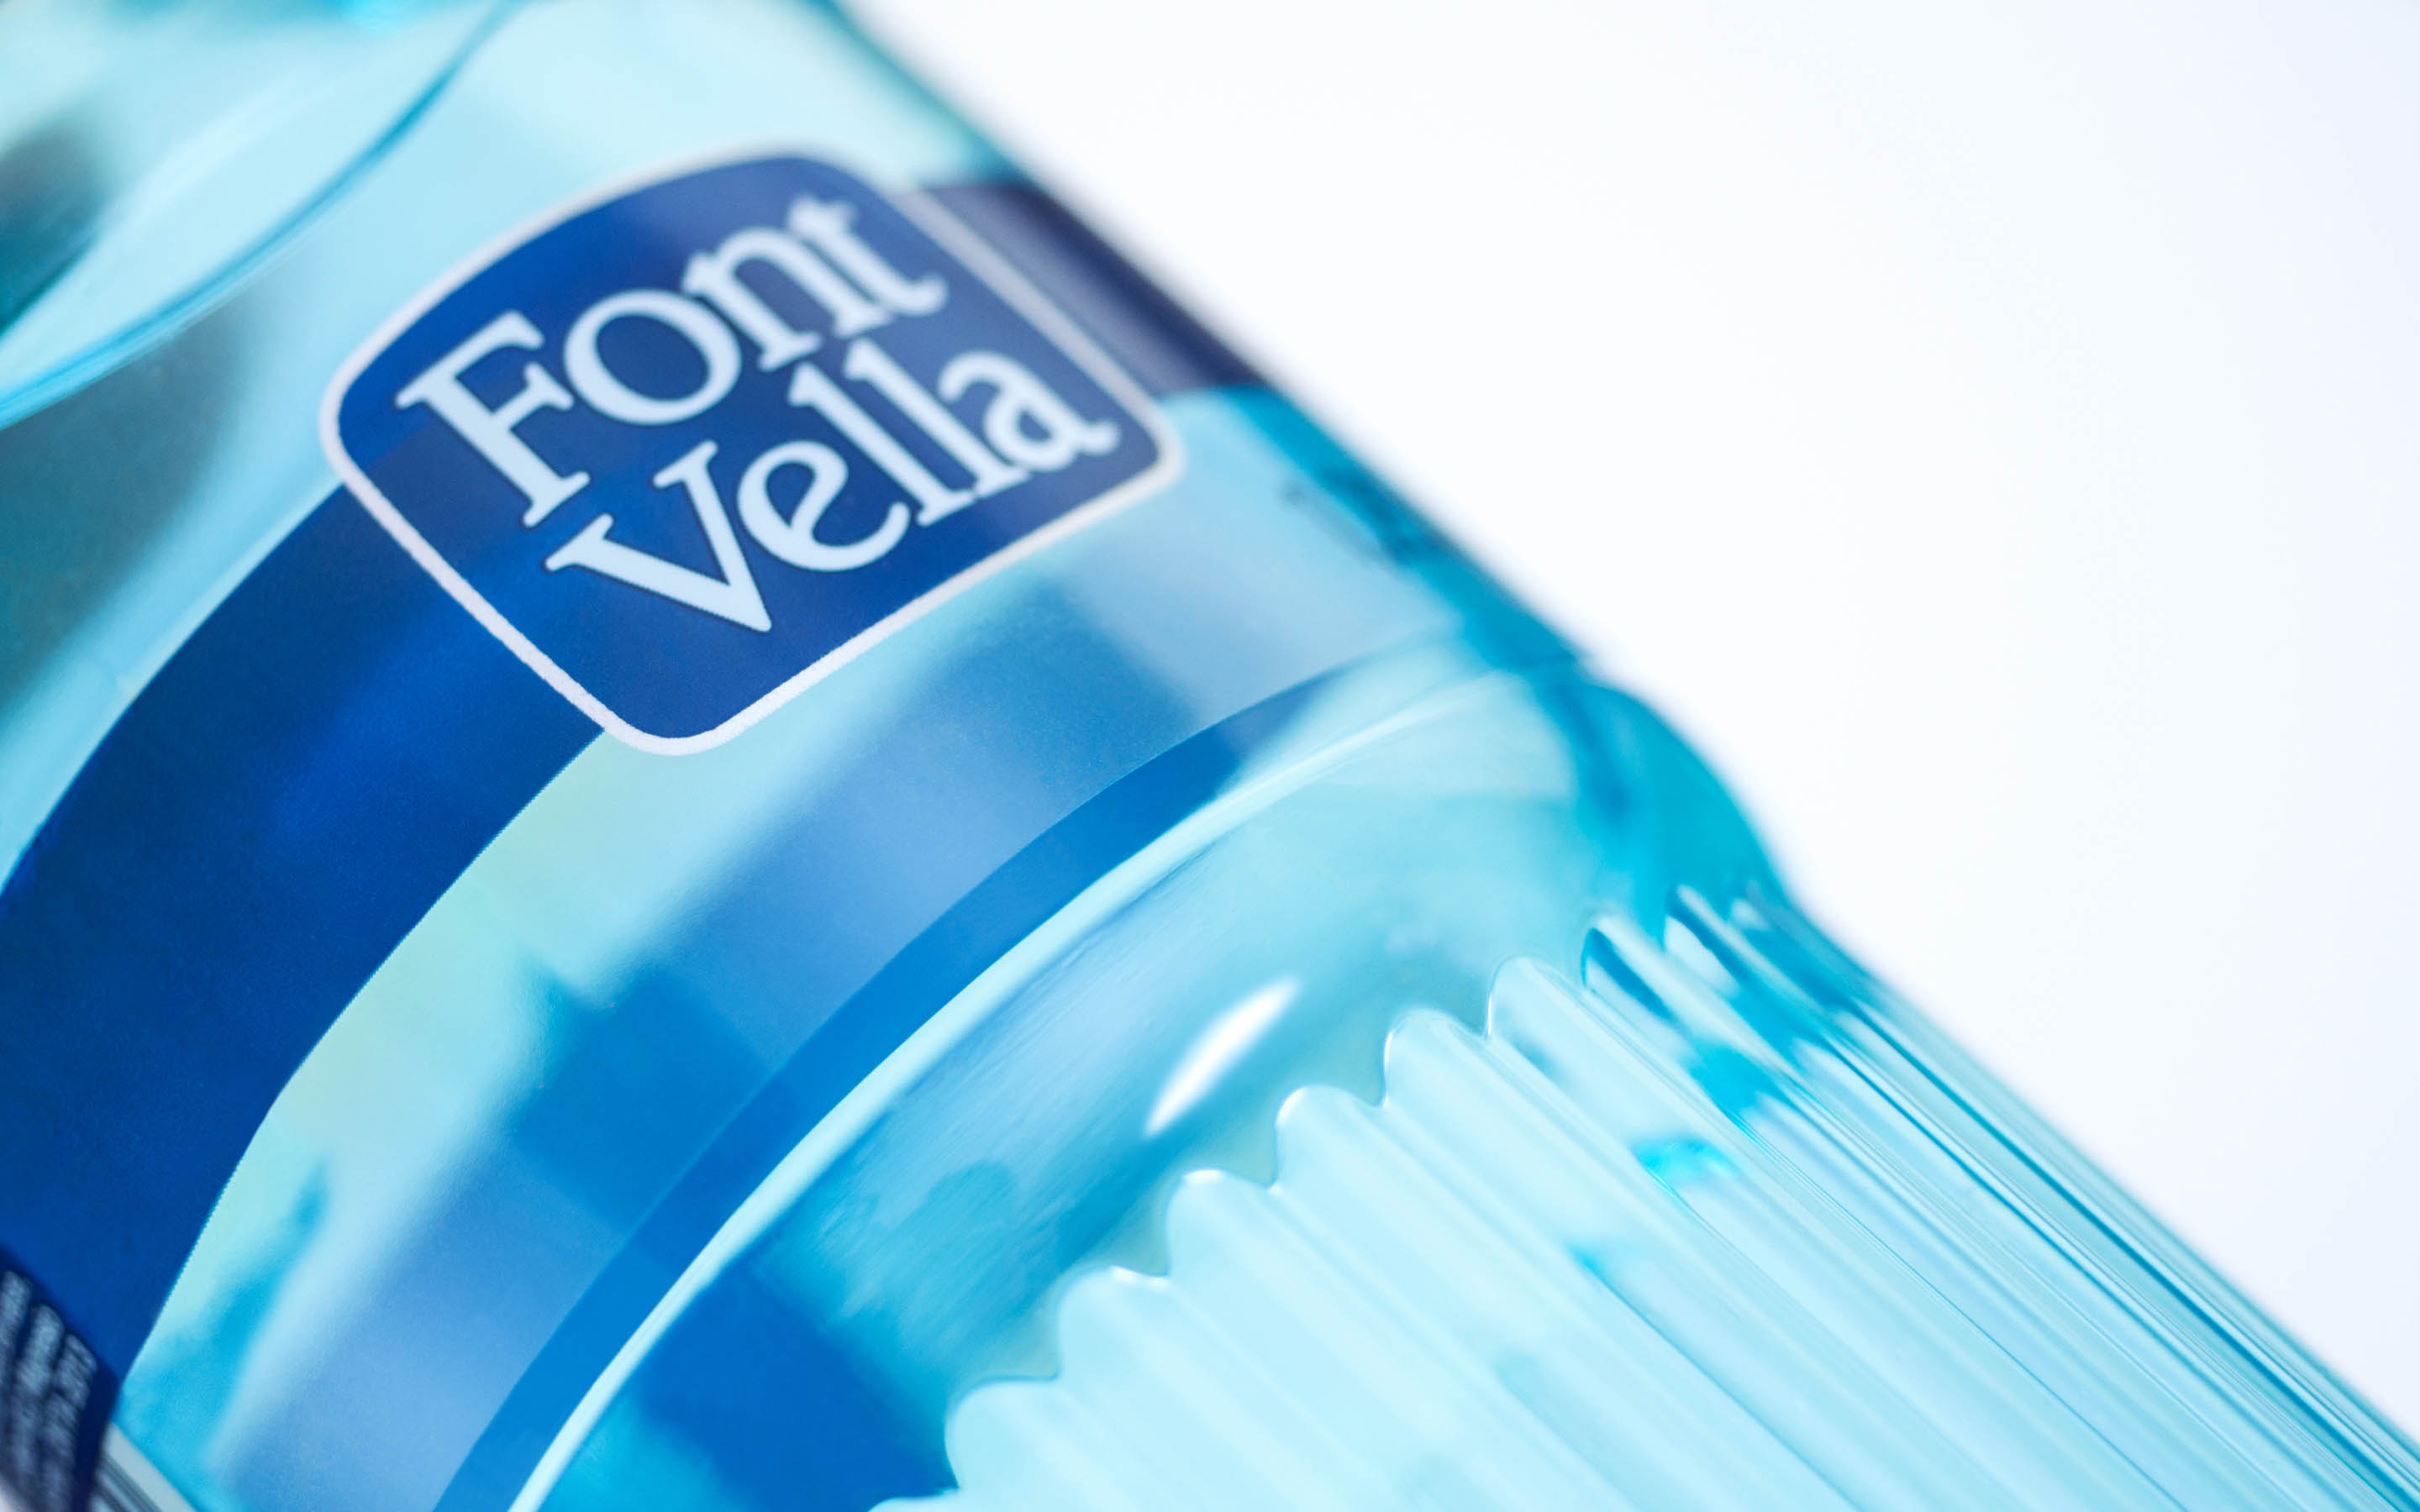 Font Vella premium is a solidarity bottle that was created to accompany special occasions and celebrations. It is a powerful proposal, with an elegant and ground-breaking design that will reinforce its positioning in the premium water range.
